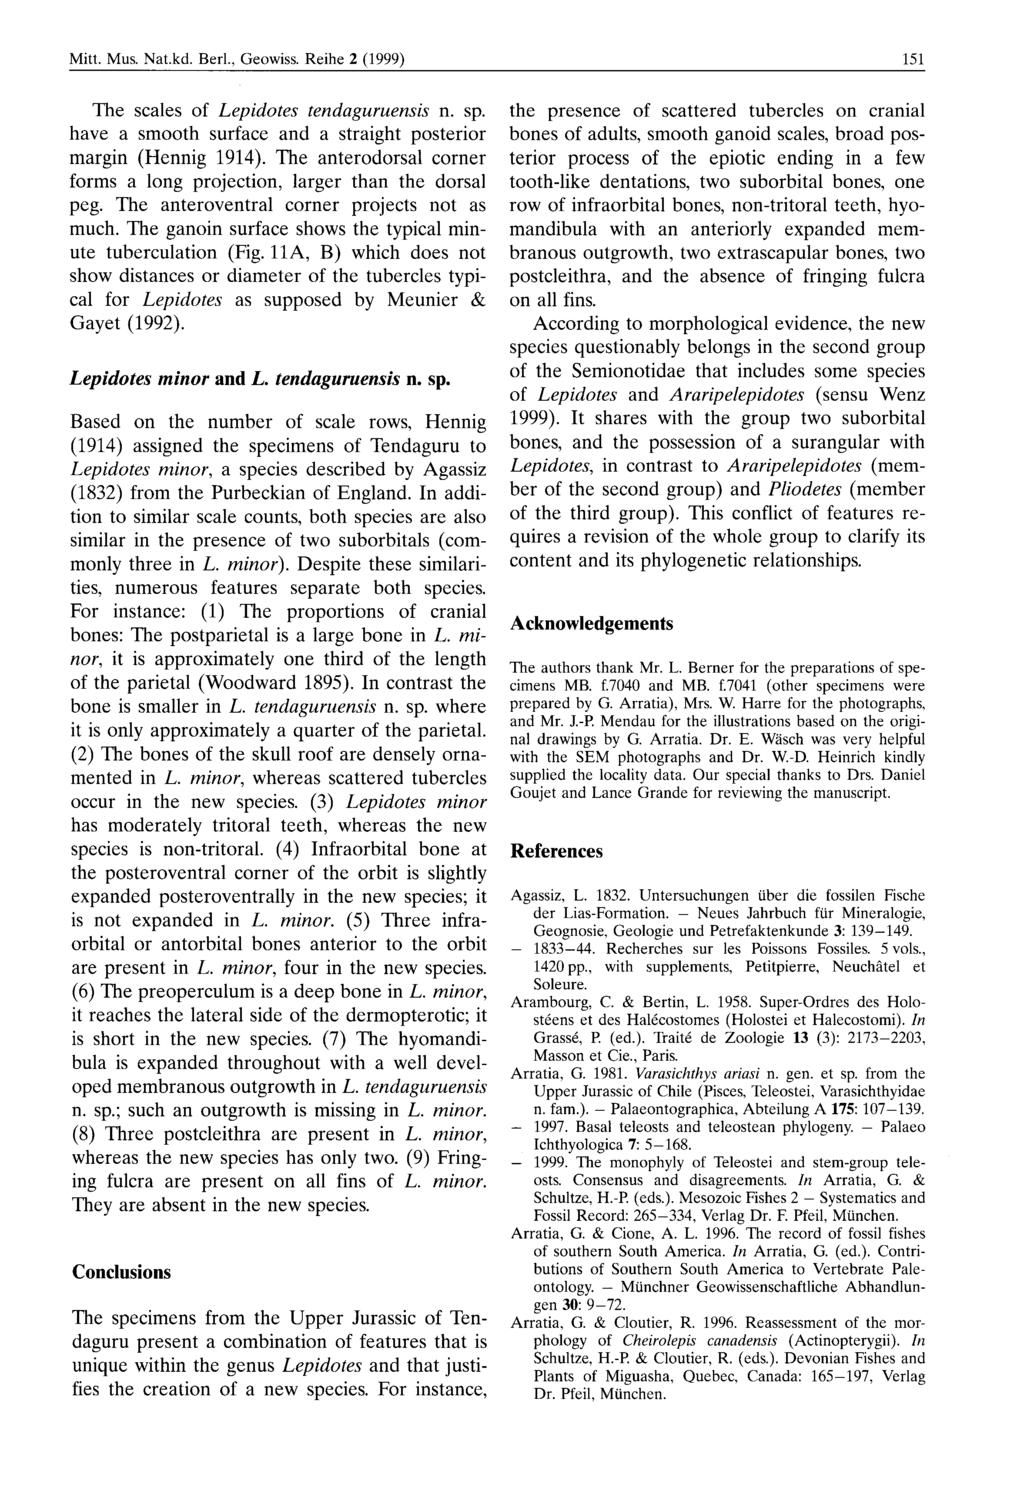 Mitt Mus Nat kd Berl, Geowiss Reihe 2 (1999) The scales of Lepidotes tendaguruensis n sp have a smooth surface and a straight posterior margin (Hennig 1914) The anterodorsal corner forms a long